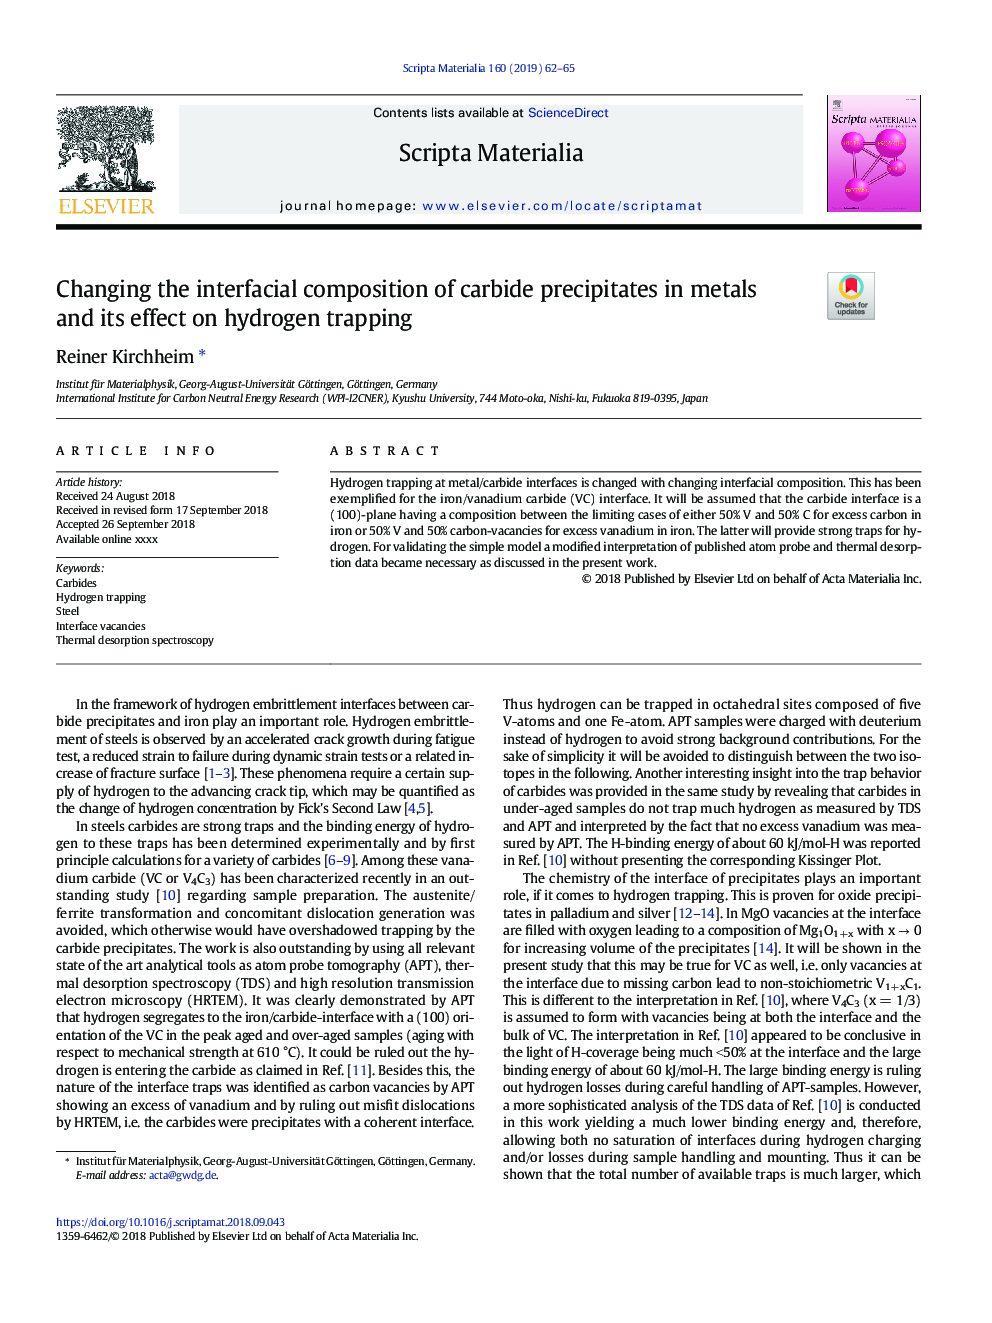 Changing the interfacial composition of carbide precipitates in metals and its effect on hydrogen trapping